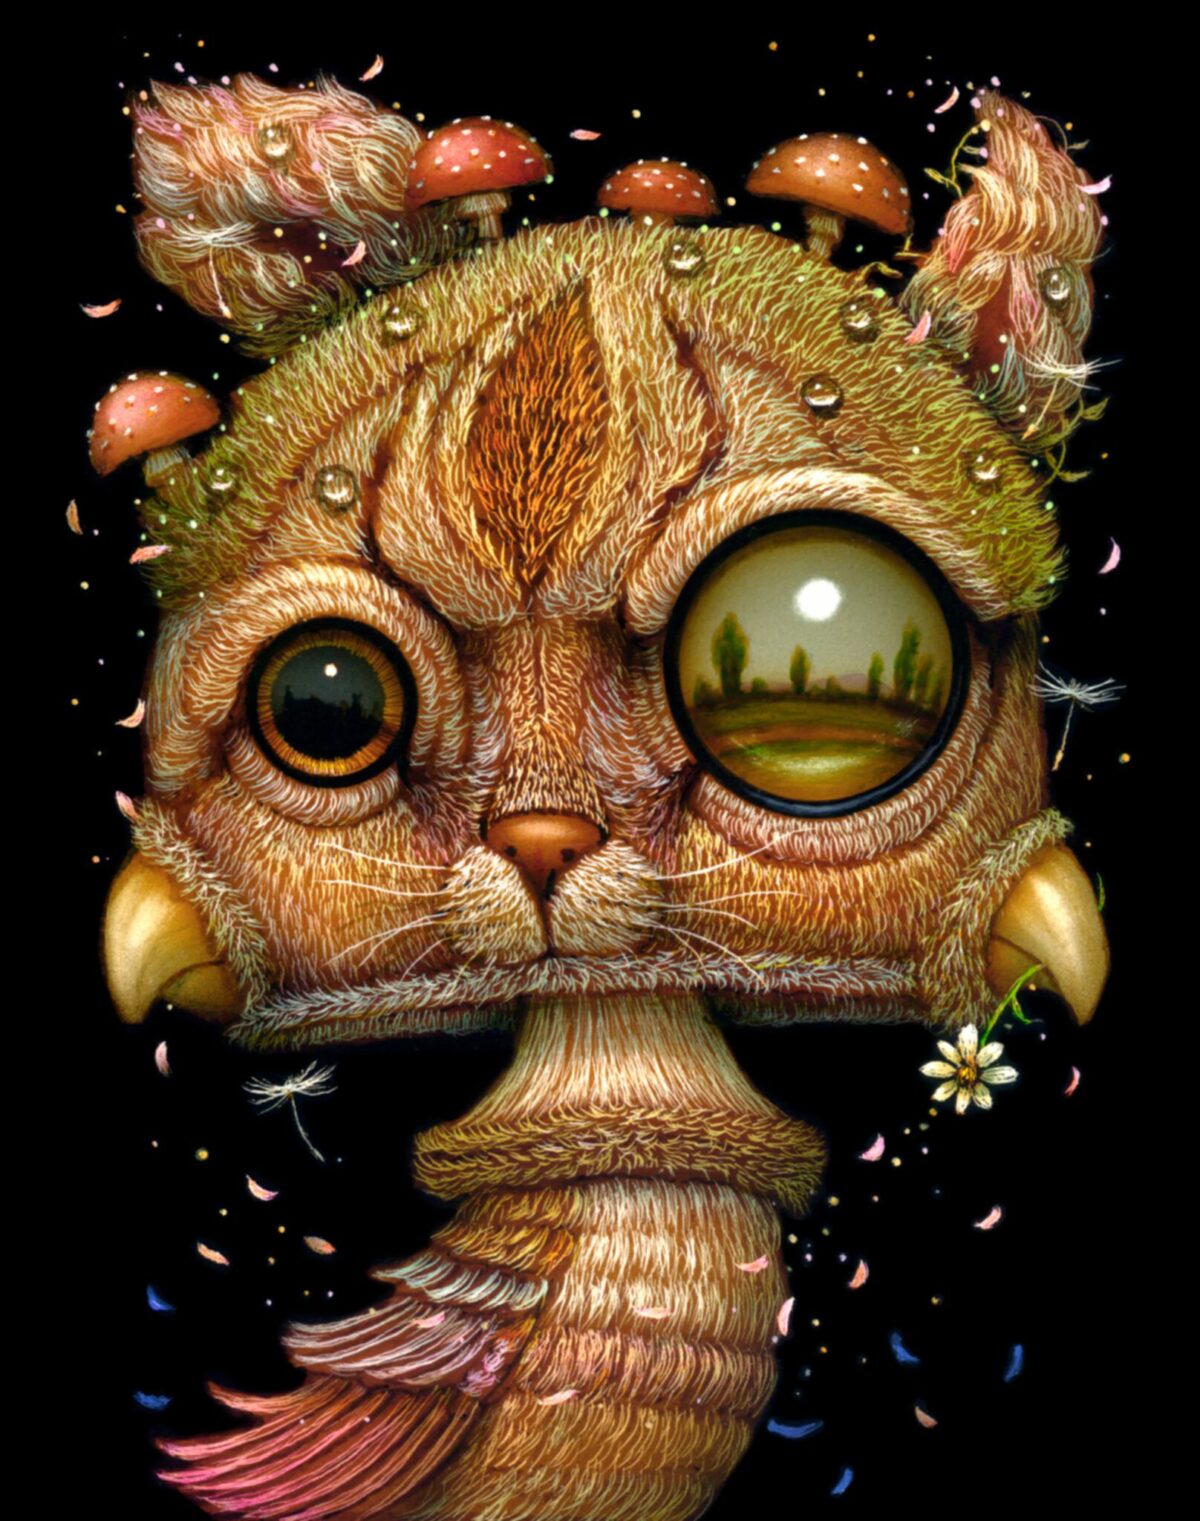 Quirky Fantastical Creatures With Oversized Eyes By Haoto Nattori 6